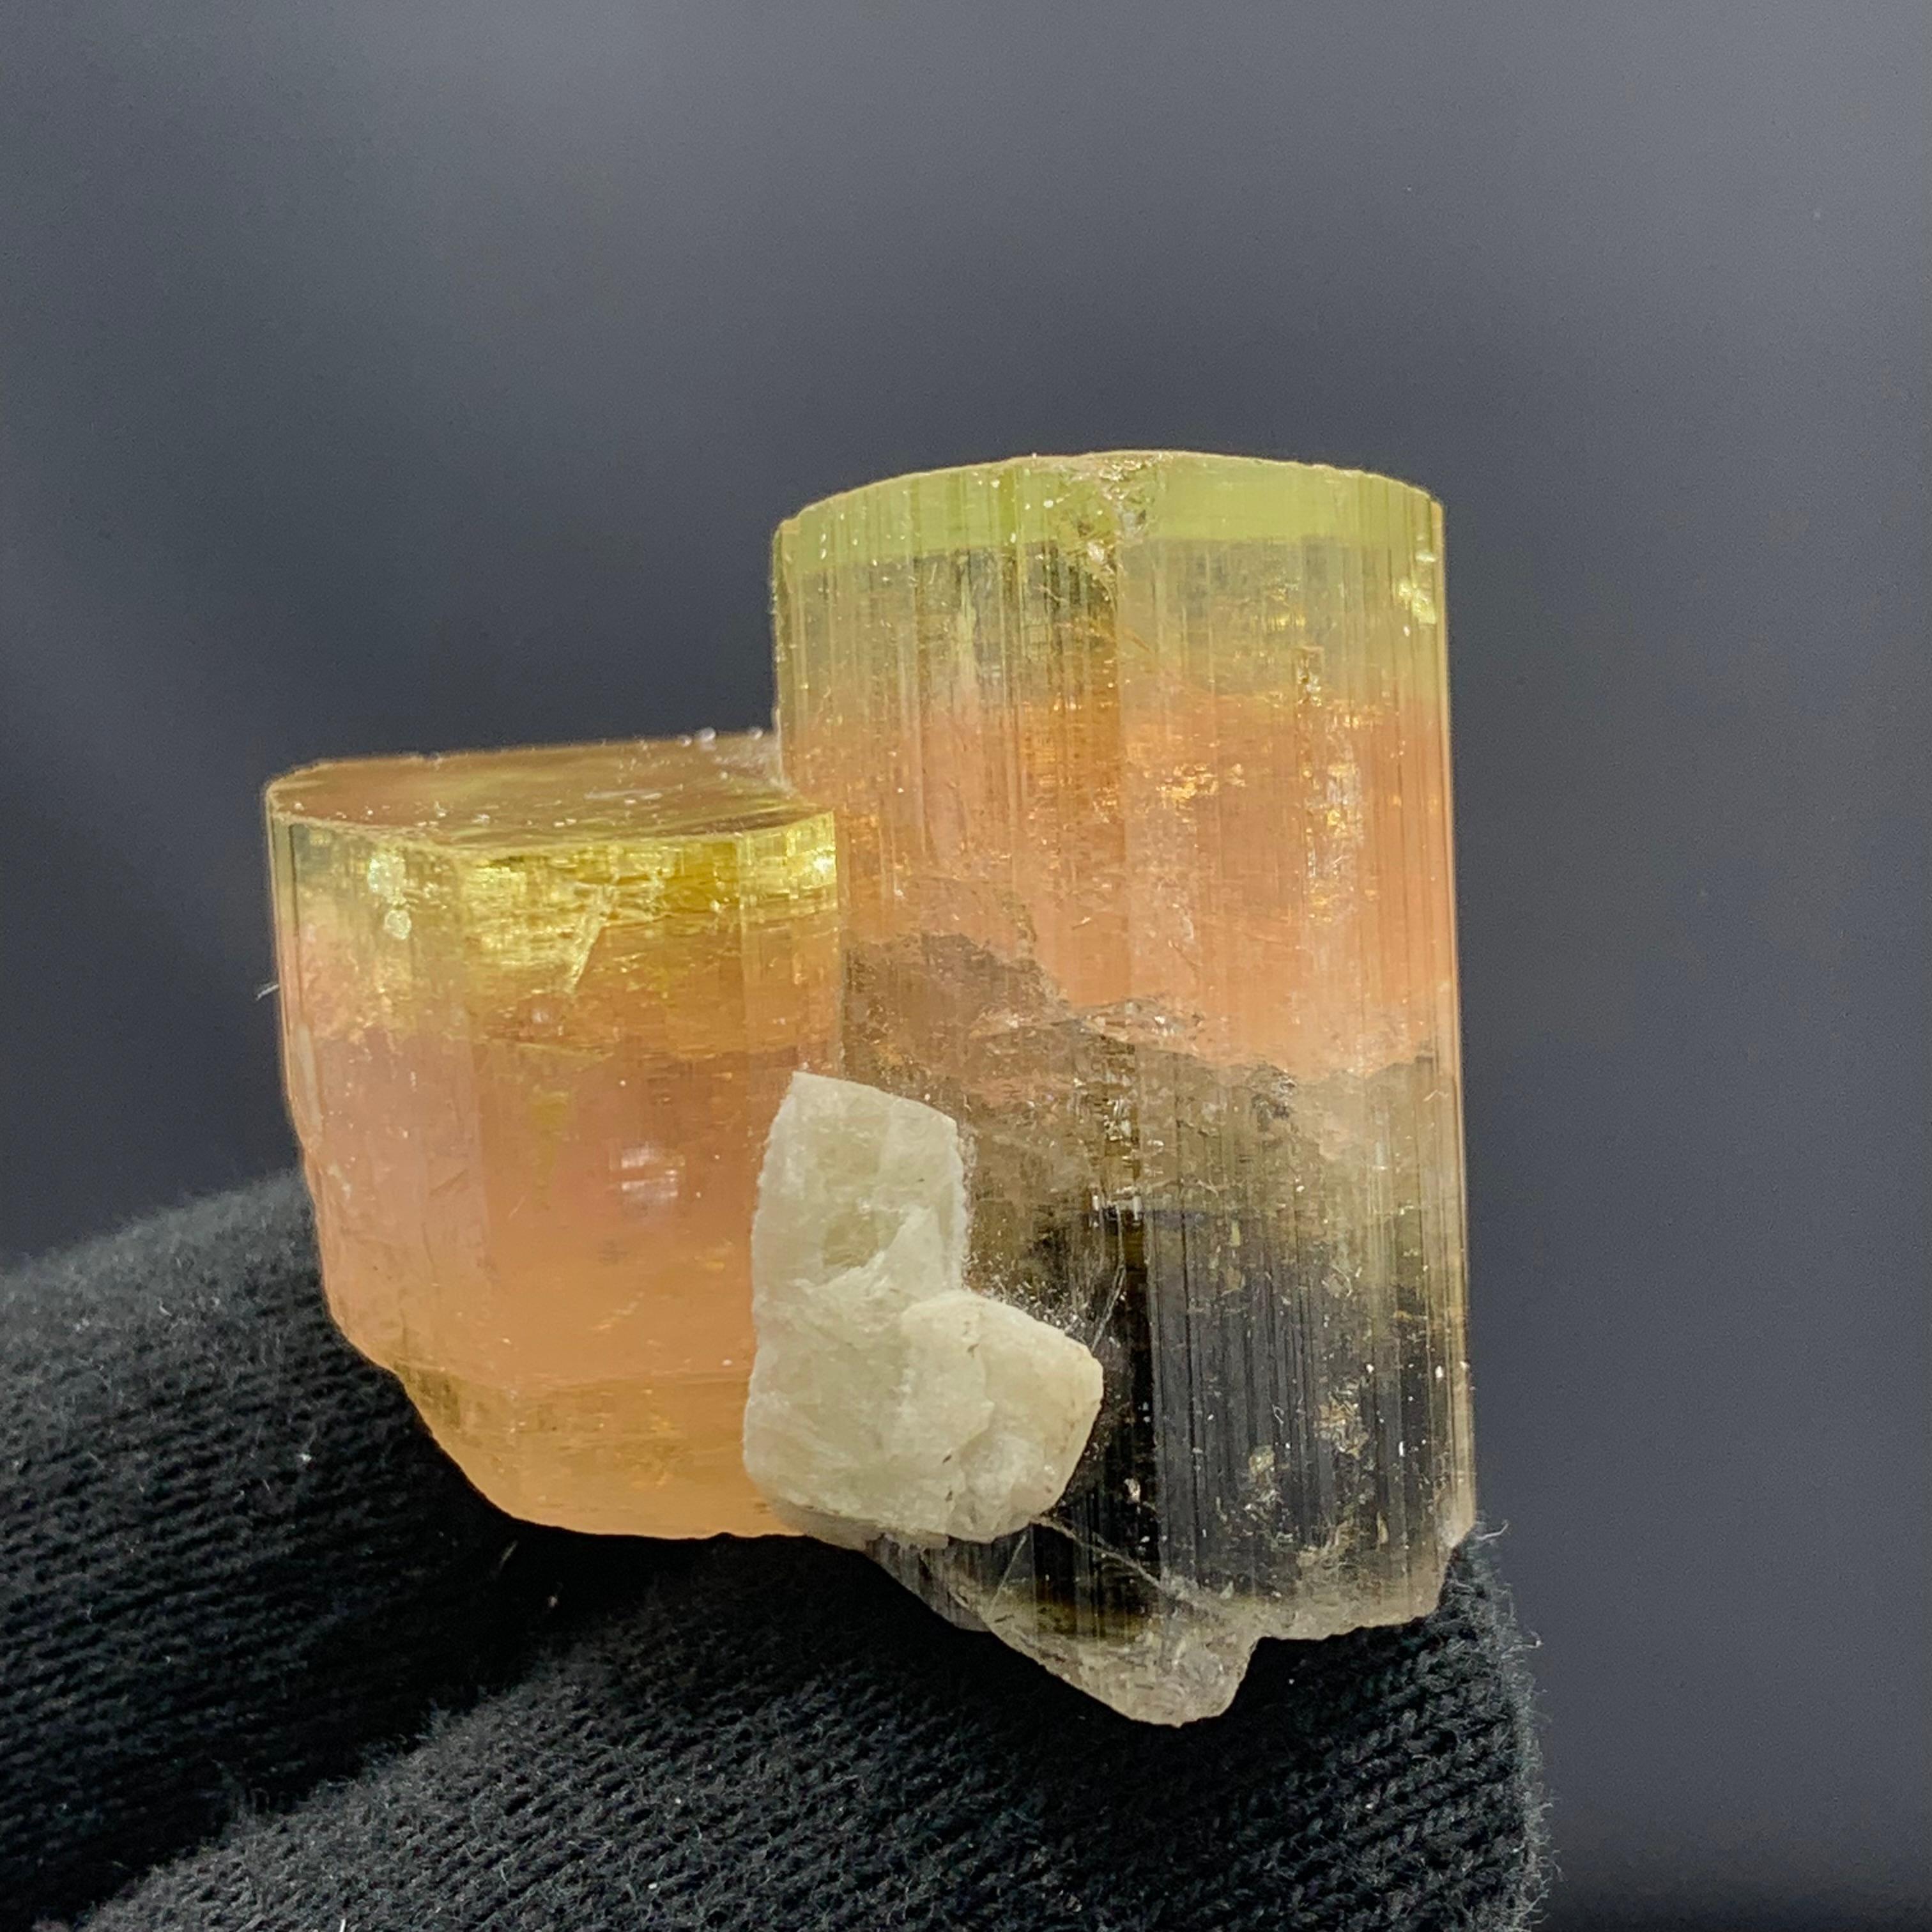 41.50 Gram Beautiful Tri Color Dual Tourmaline Specimen From Afghanistan 

Weight: 41.50 Gram 
Dimension: 3.2 x 3.5 x 2.2 Cm 
Origin: Paprook Mine, Afghanistan 

Tourmaline is a crystalline silicate mineral group in which boron is compounded with